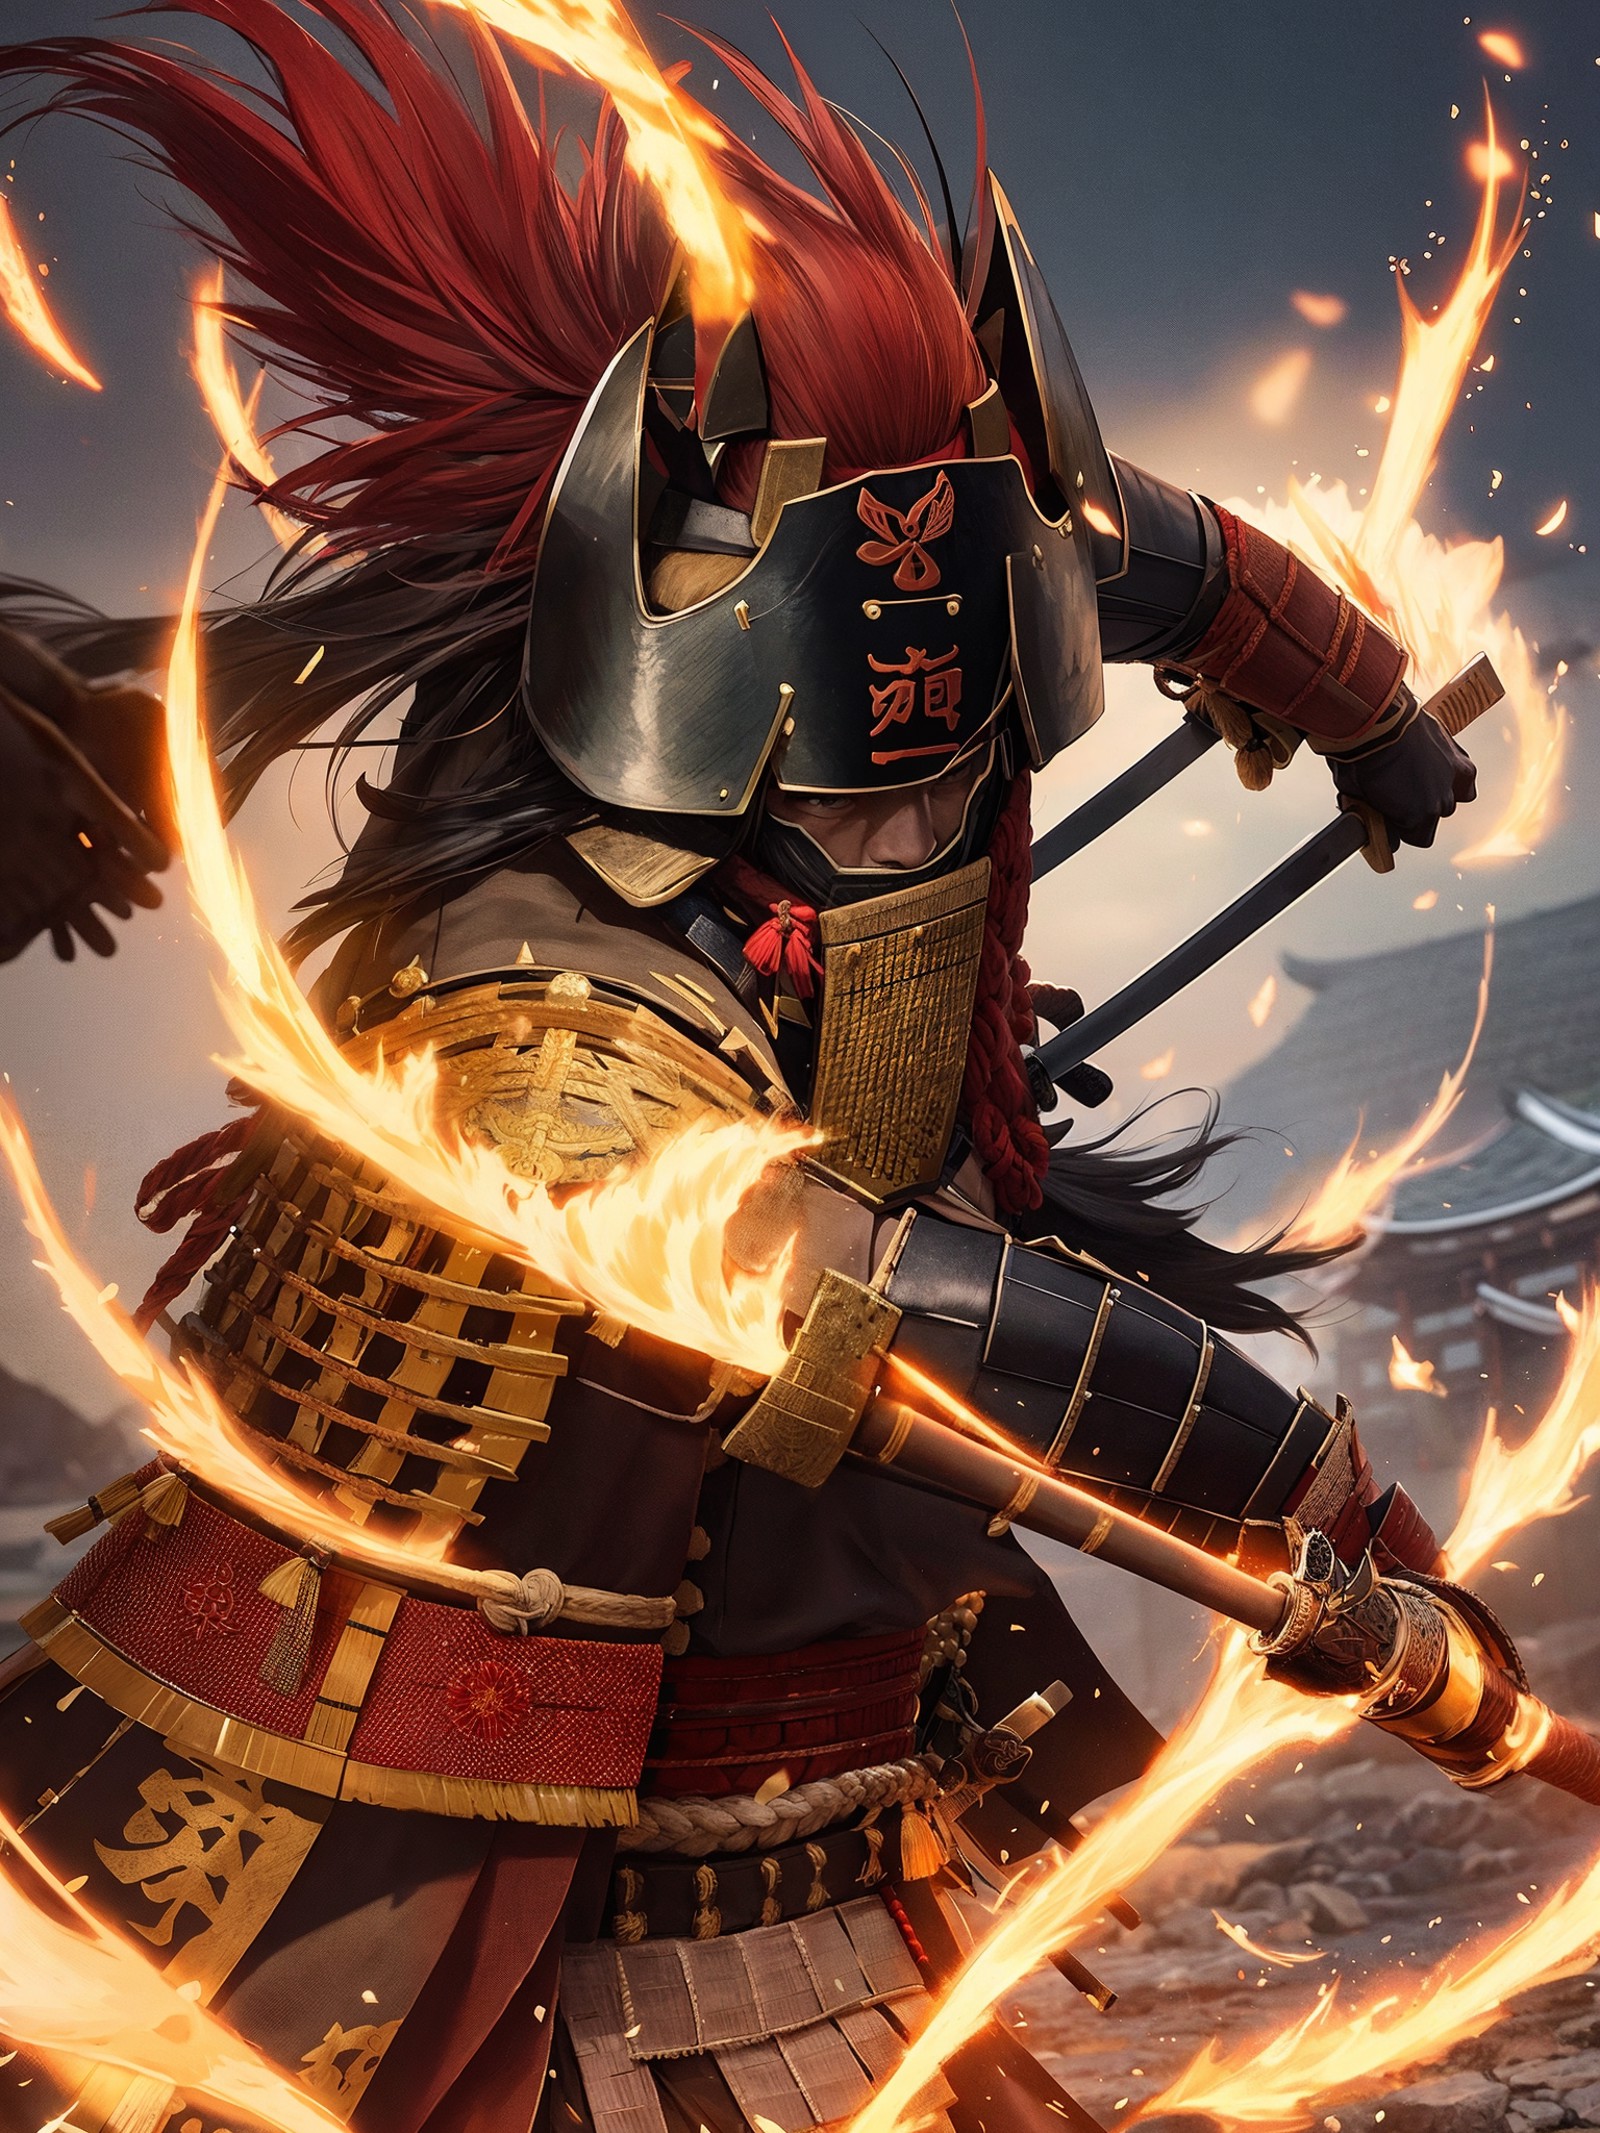 Visualize a powerful samurai in the midst of an important historical moment, displaying their skill and bravery as they ma...